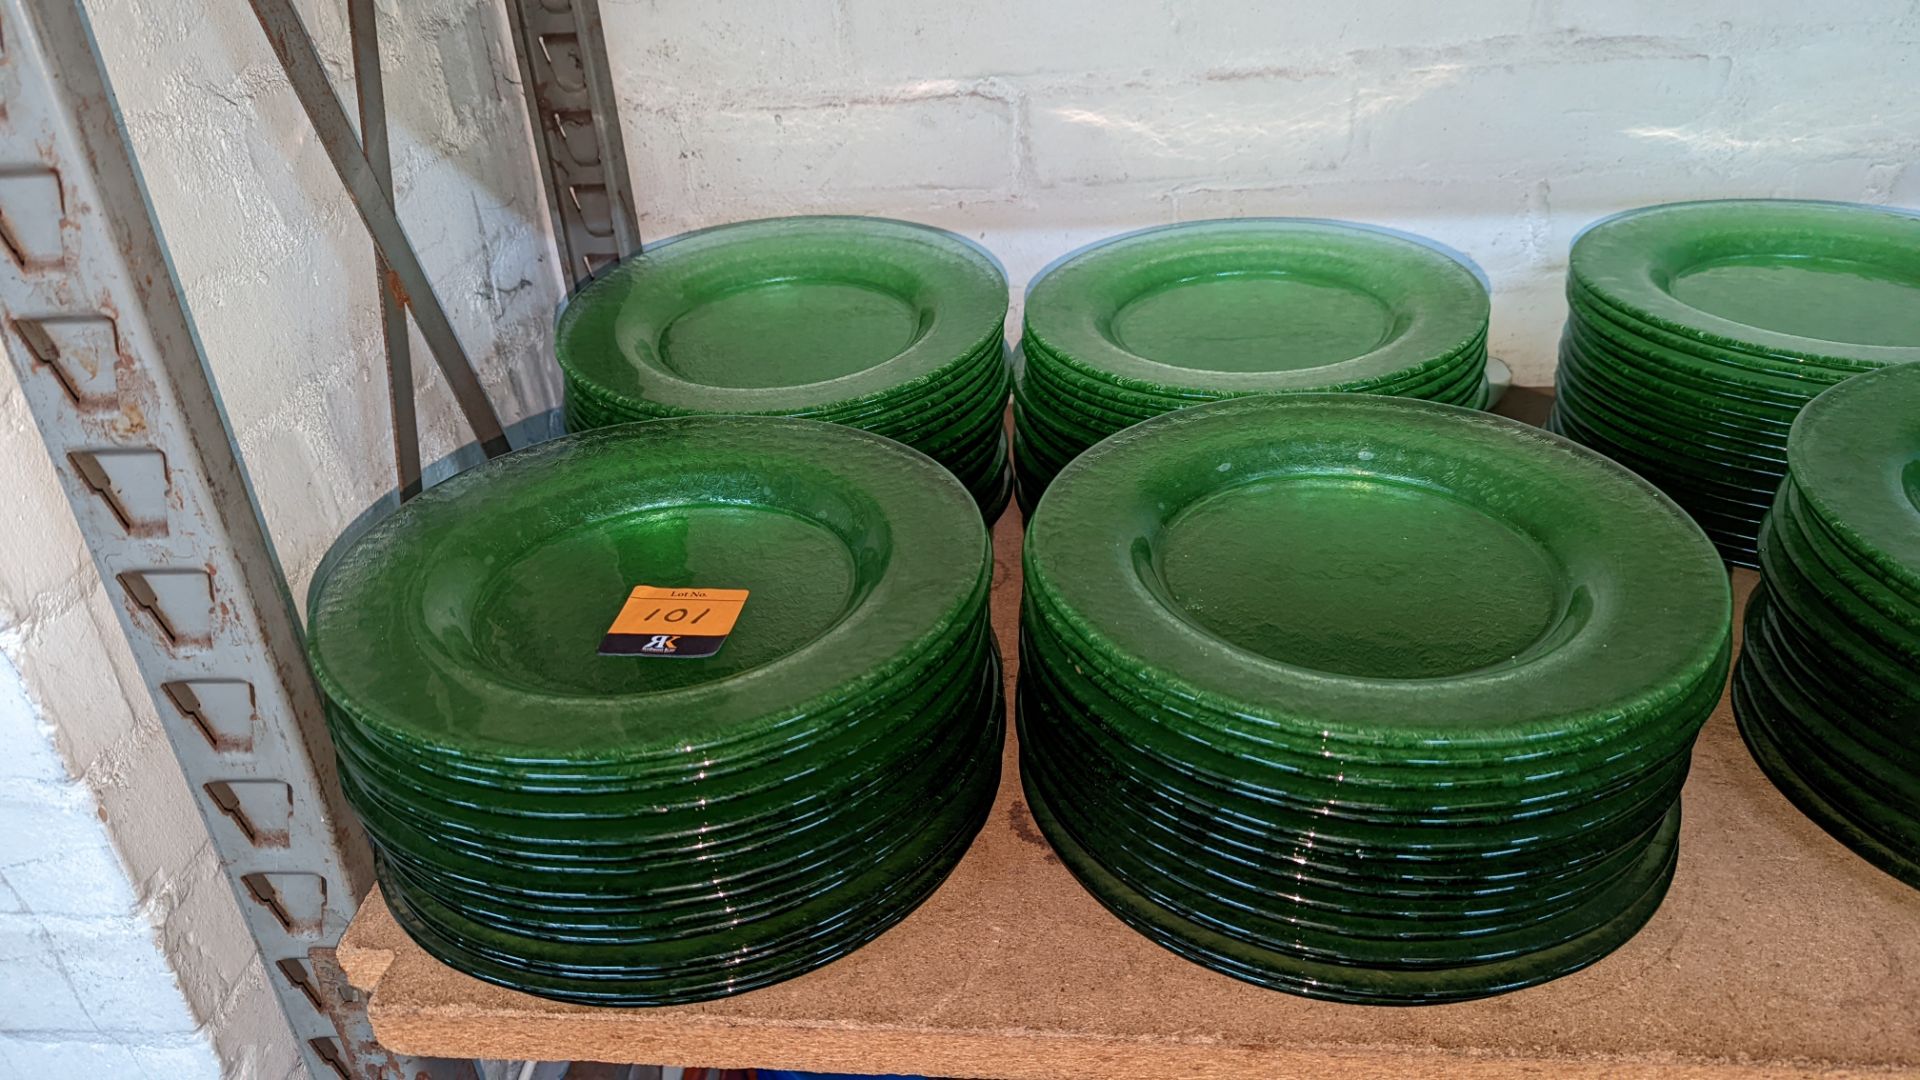 60 off green glass plates each measuring approximately 27cm diameter - Image 2 of 3